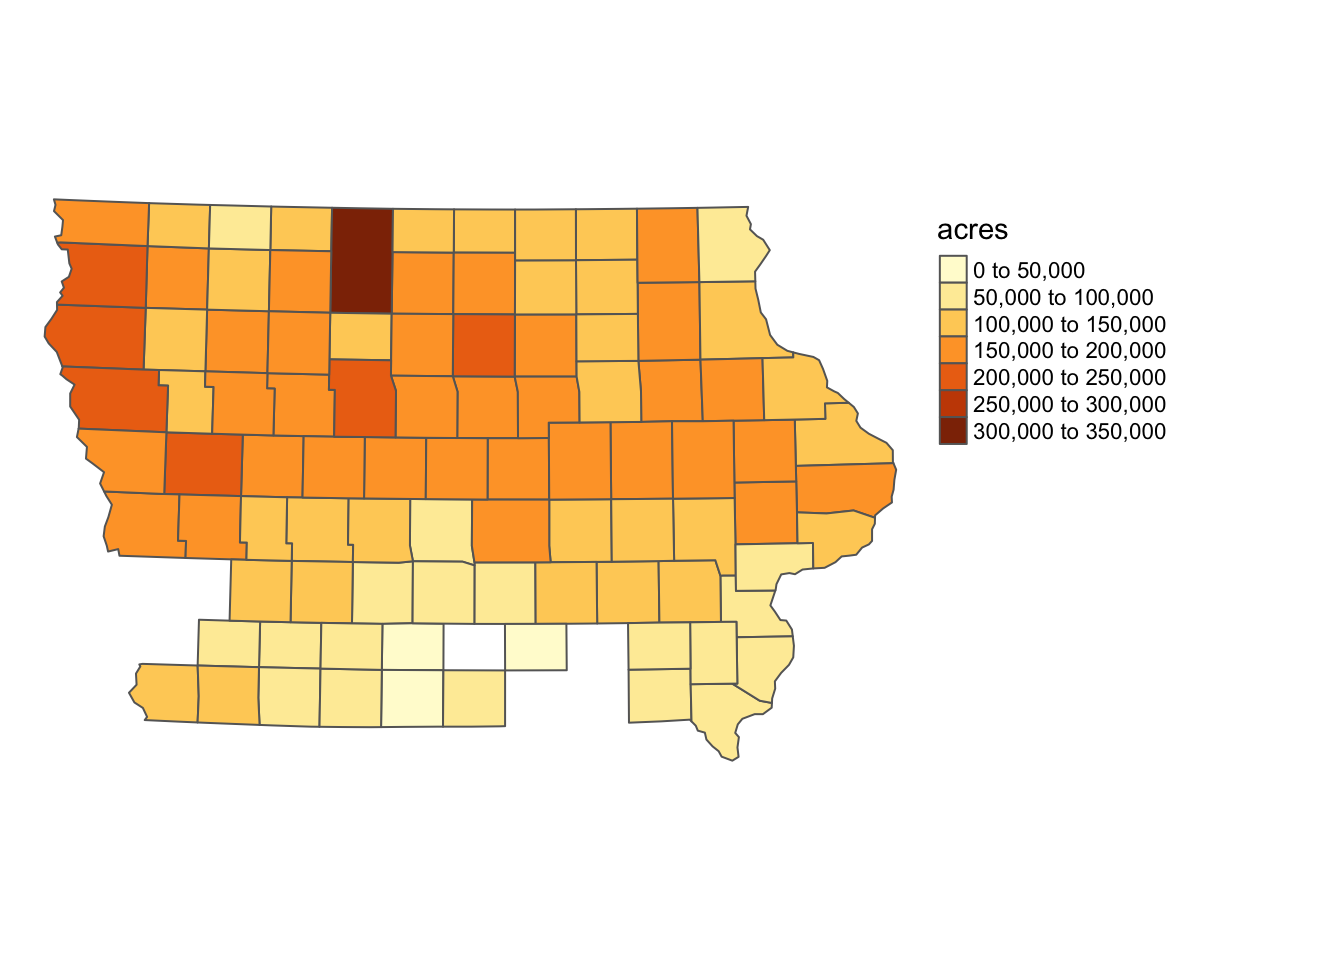 Map of Iowa counties color-differentiated by corn planted acreage